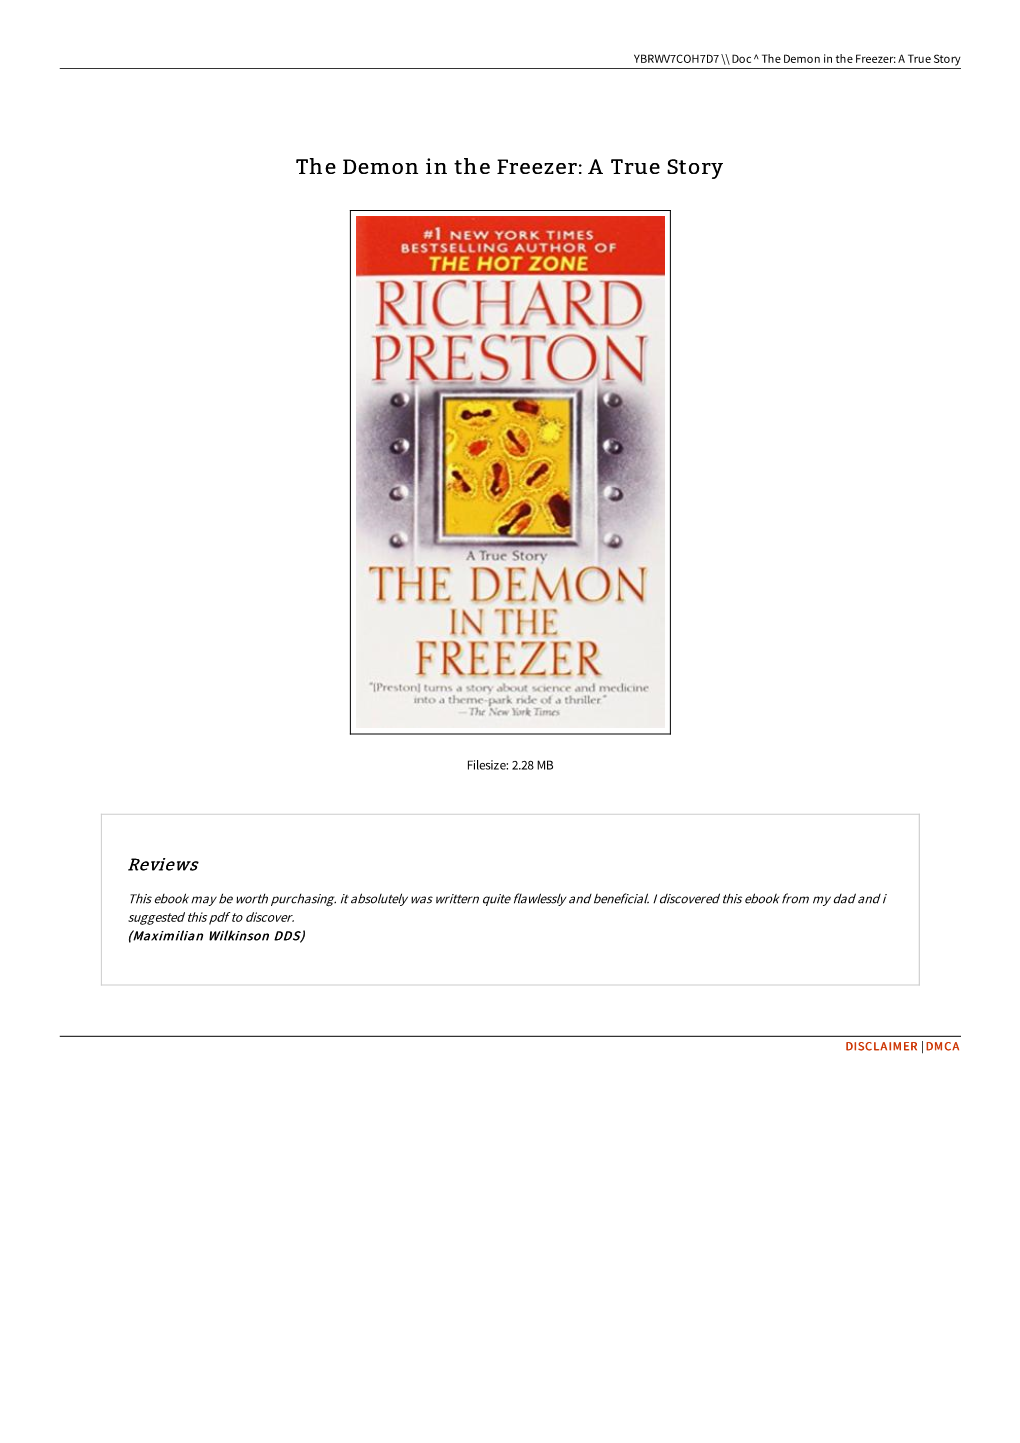 Find PDF the Demon in the Freezer: a True Story